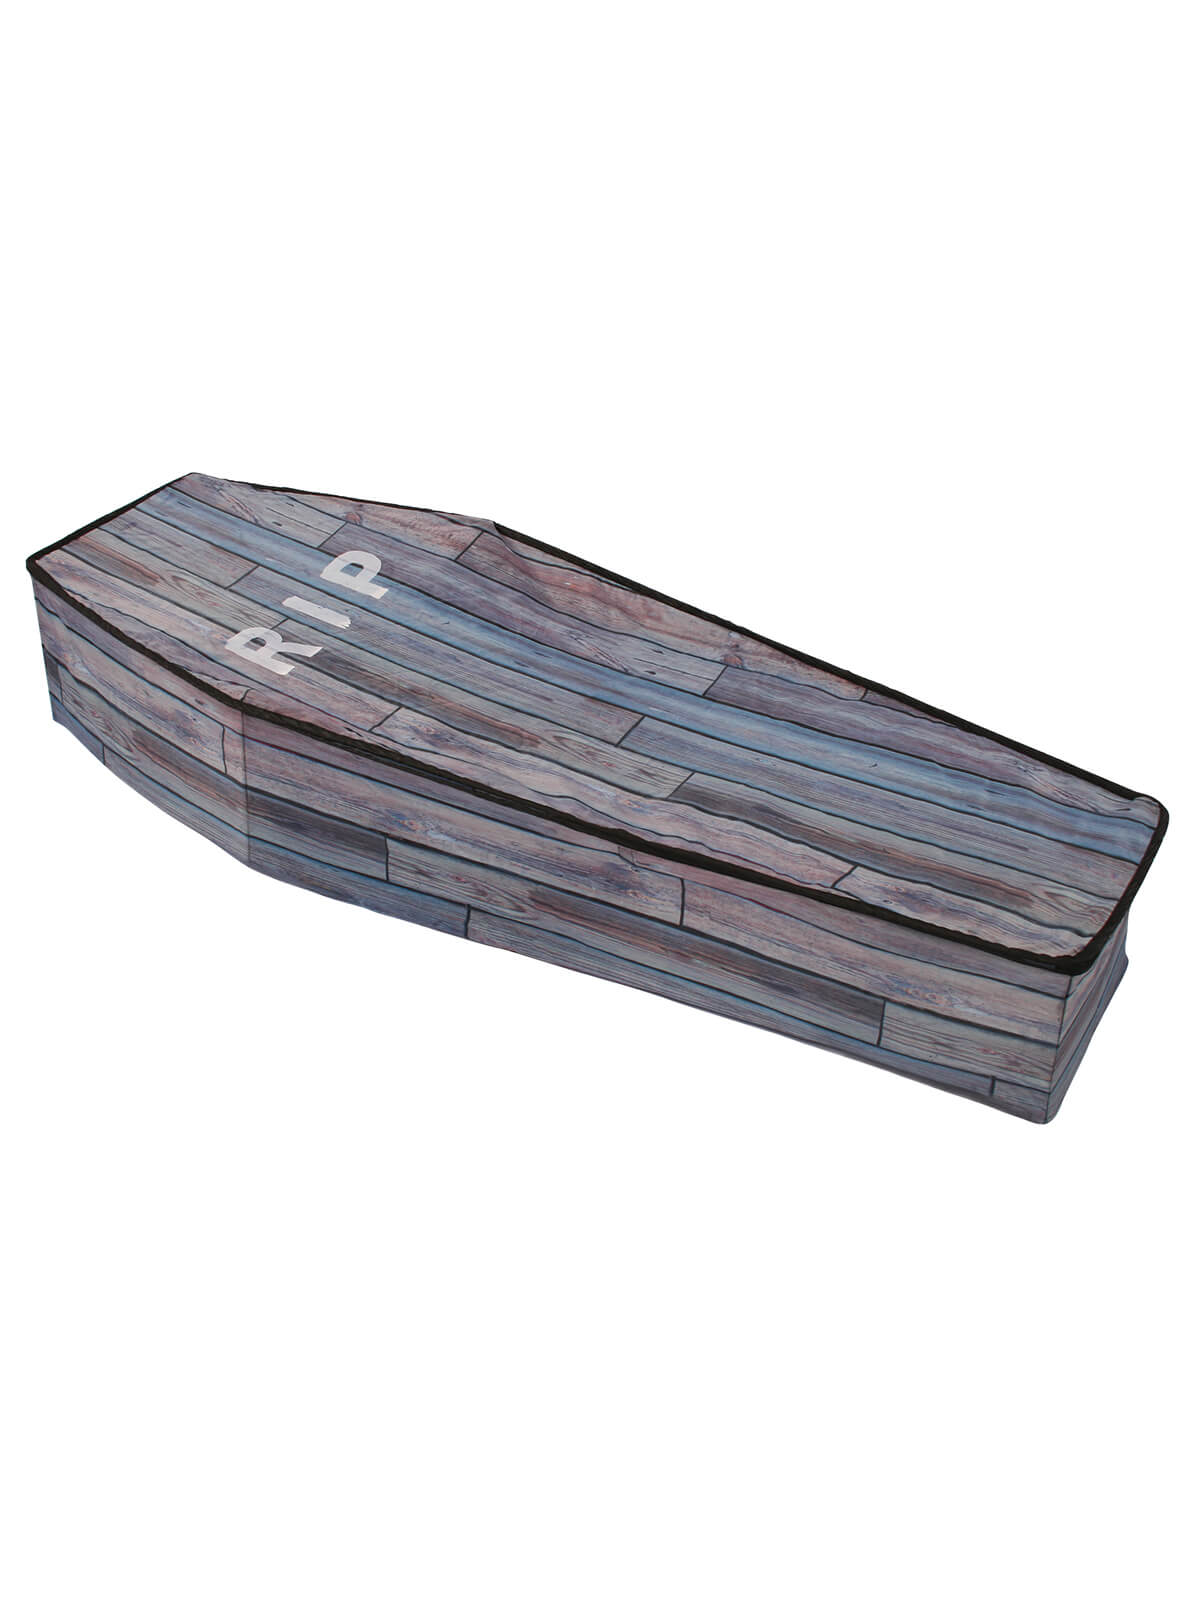 Collapsible Woodlock Coffin (1.5m)